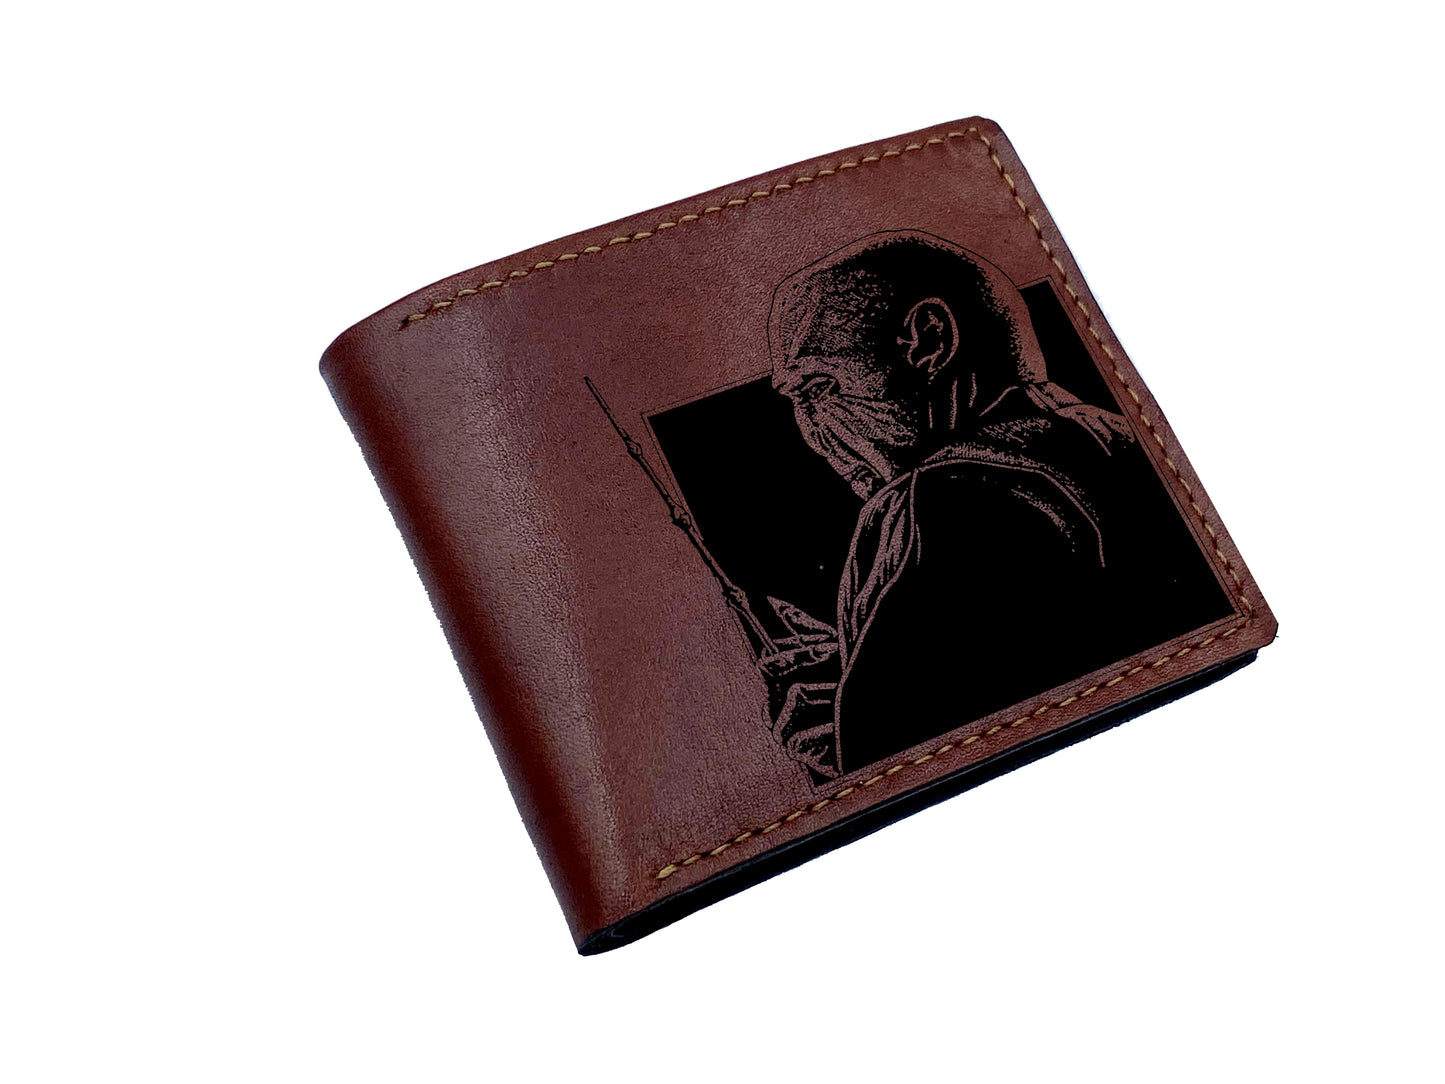 Mayan Corner - Personalized Harry Porter leather wallet, birthday gift ideas for him, Voldemort leather art wallet